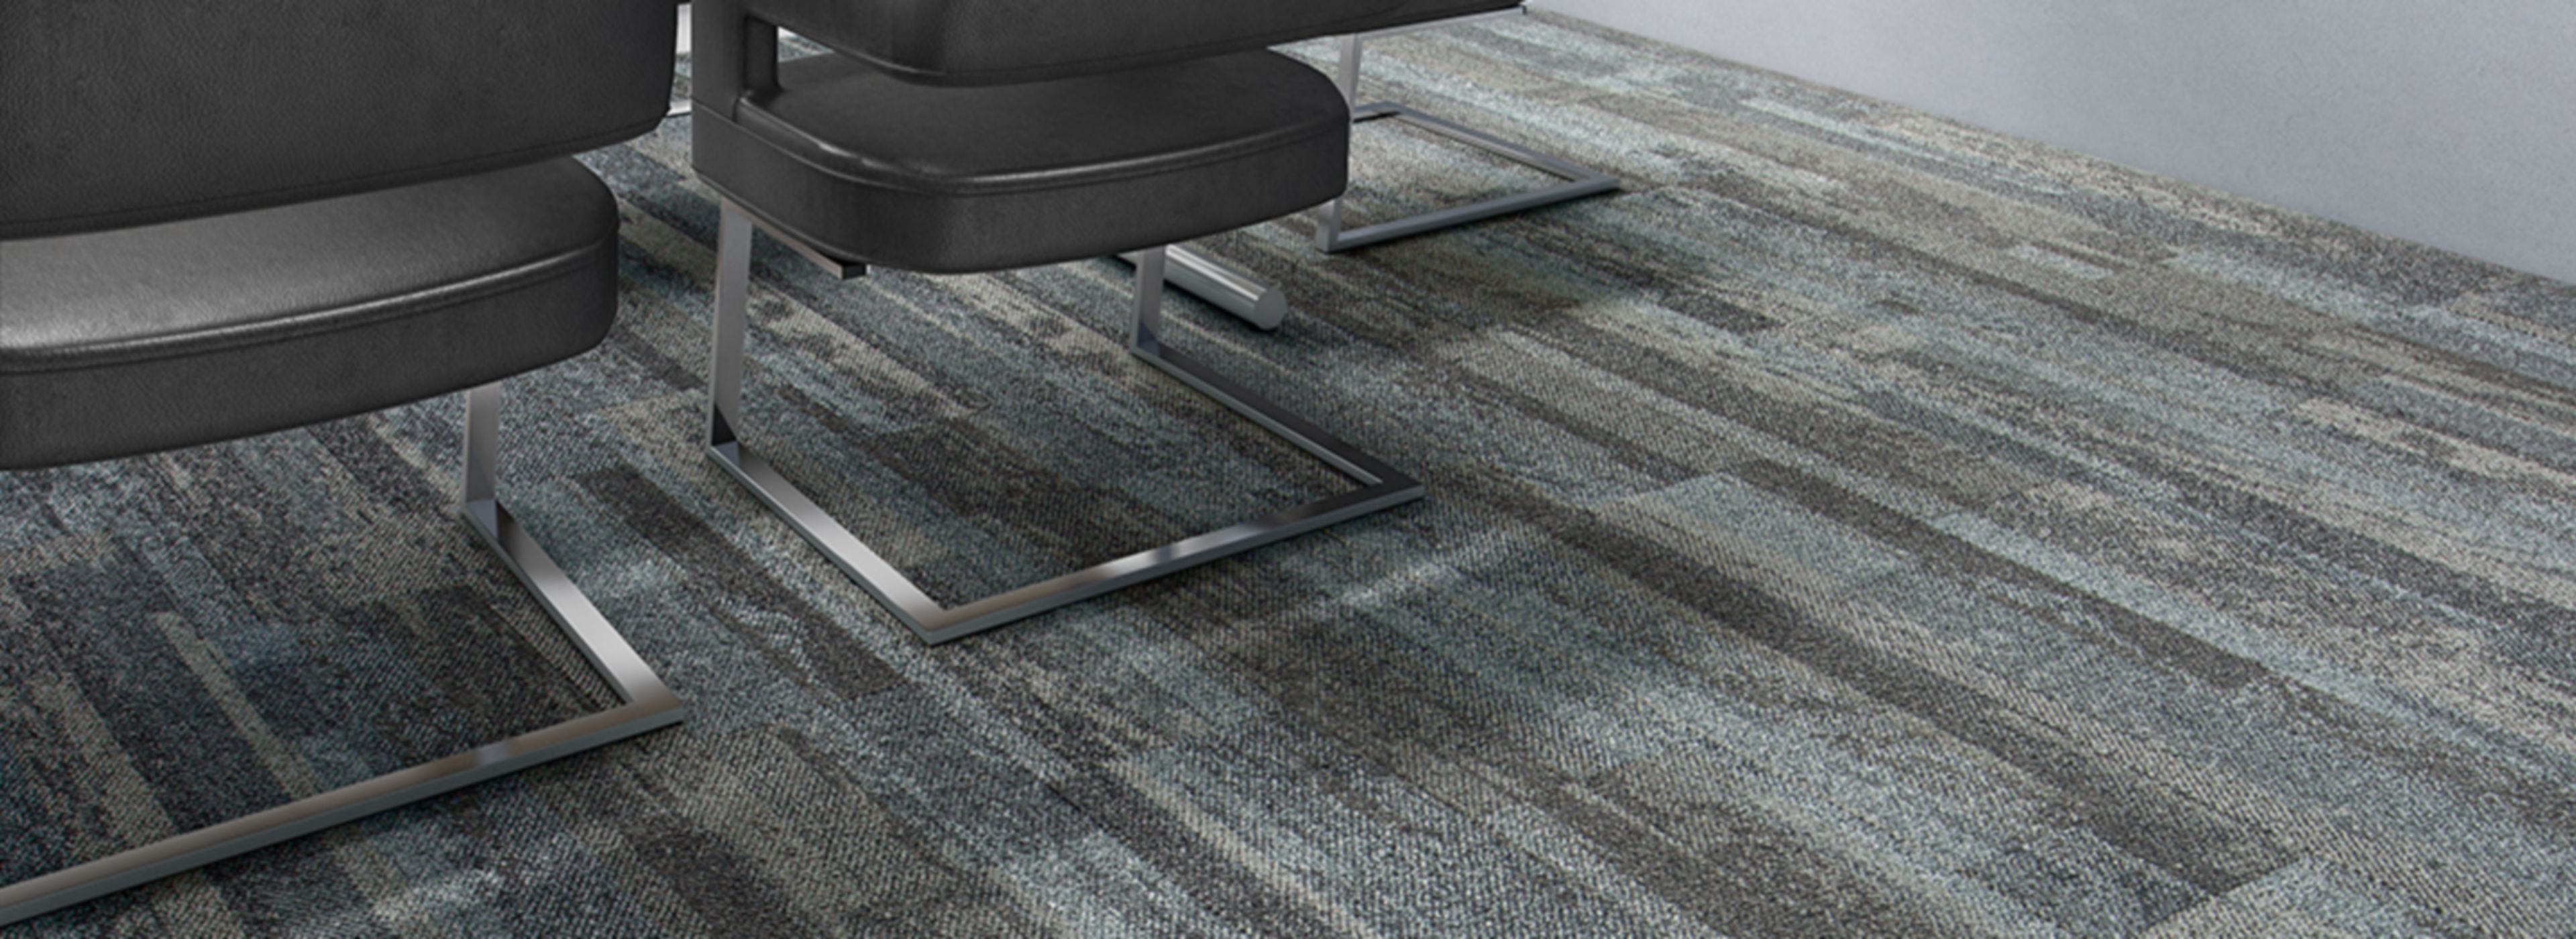 Interface Naturally Weathered plank carpet tile in office meeting room with reflection of natural light through windows imagen número 1